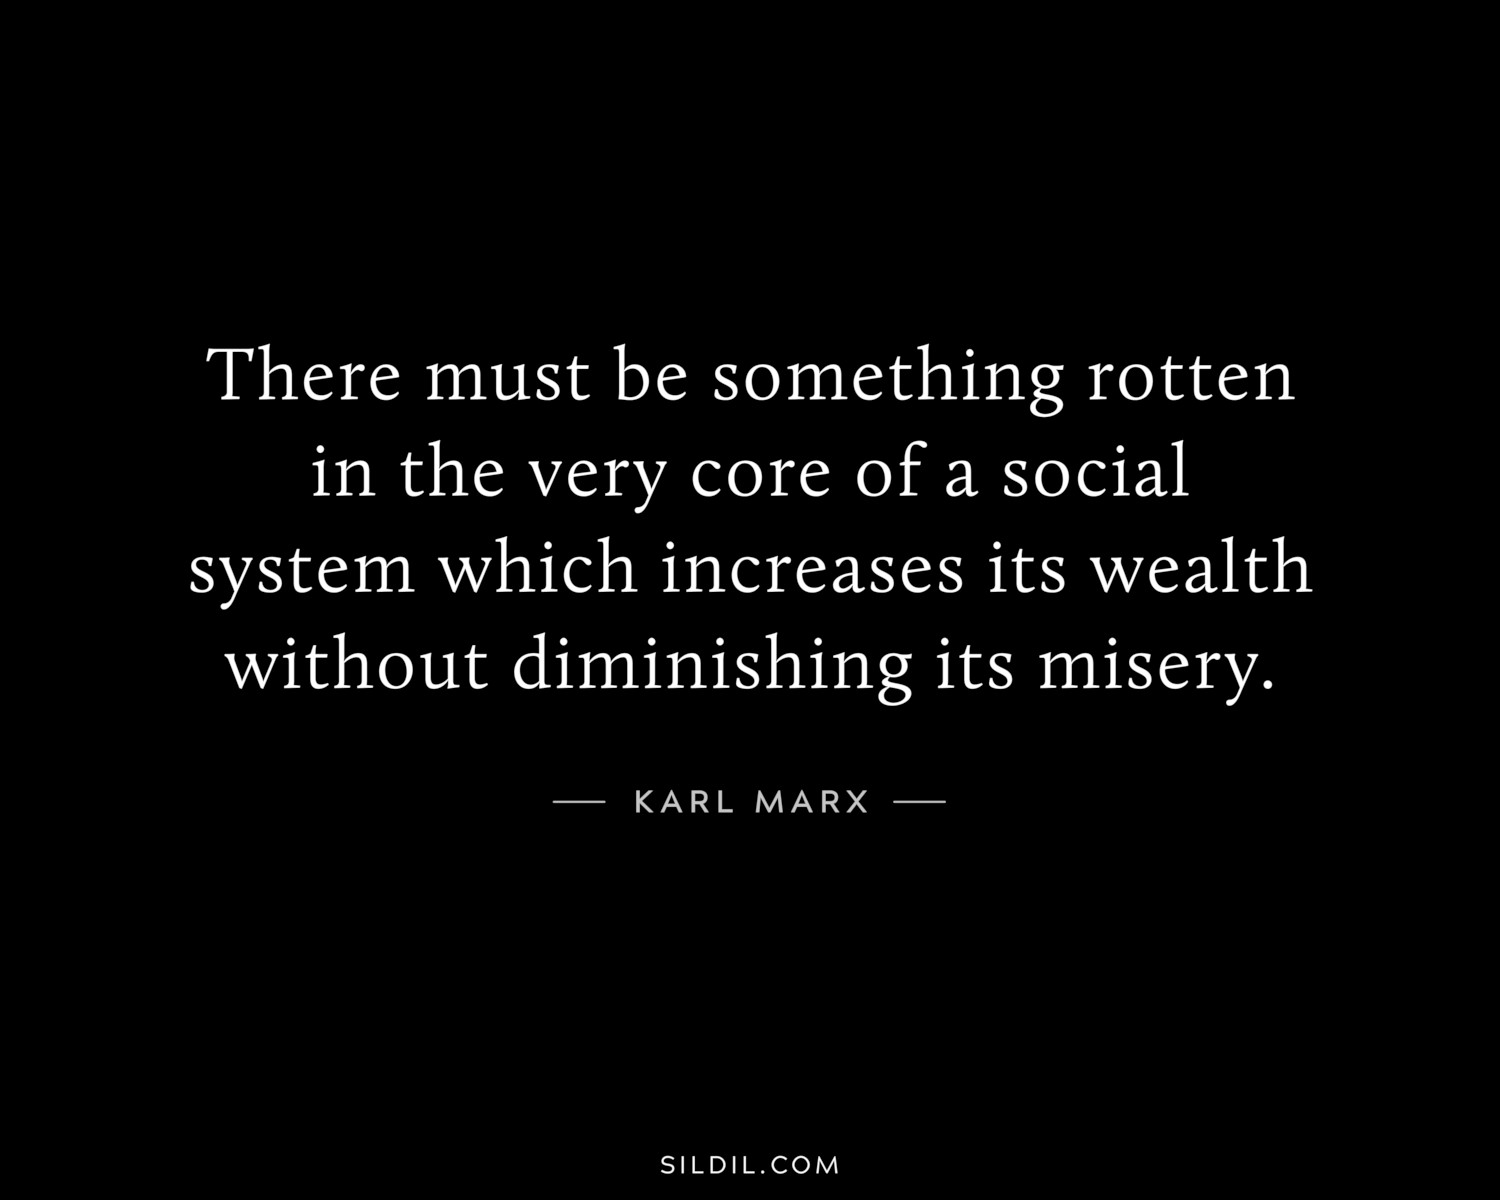 There must be something rotten in the very core of a social system which increases its wealth without diminishing its misery.